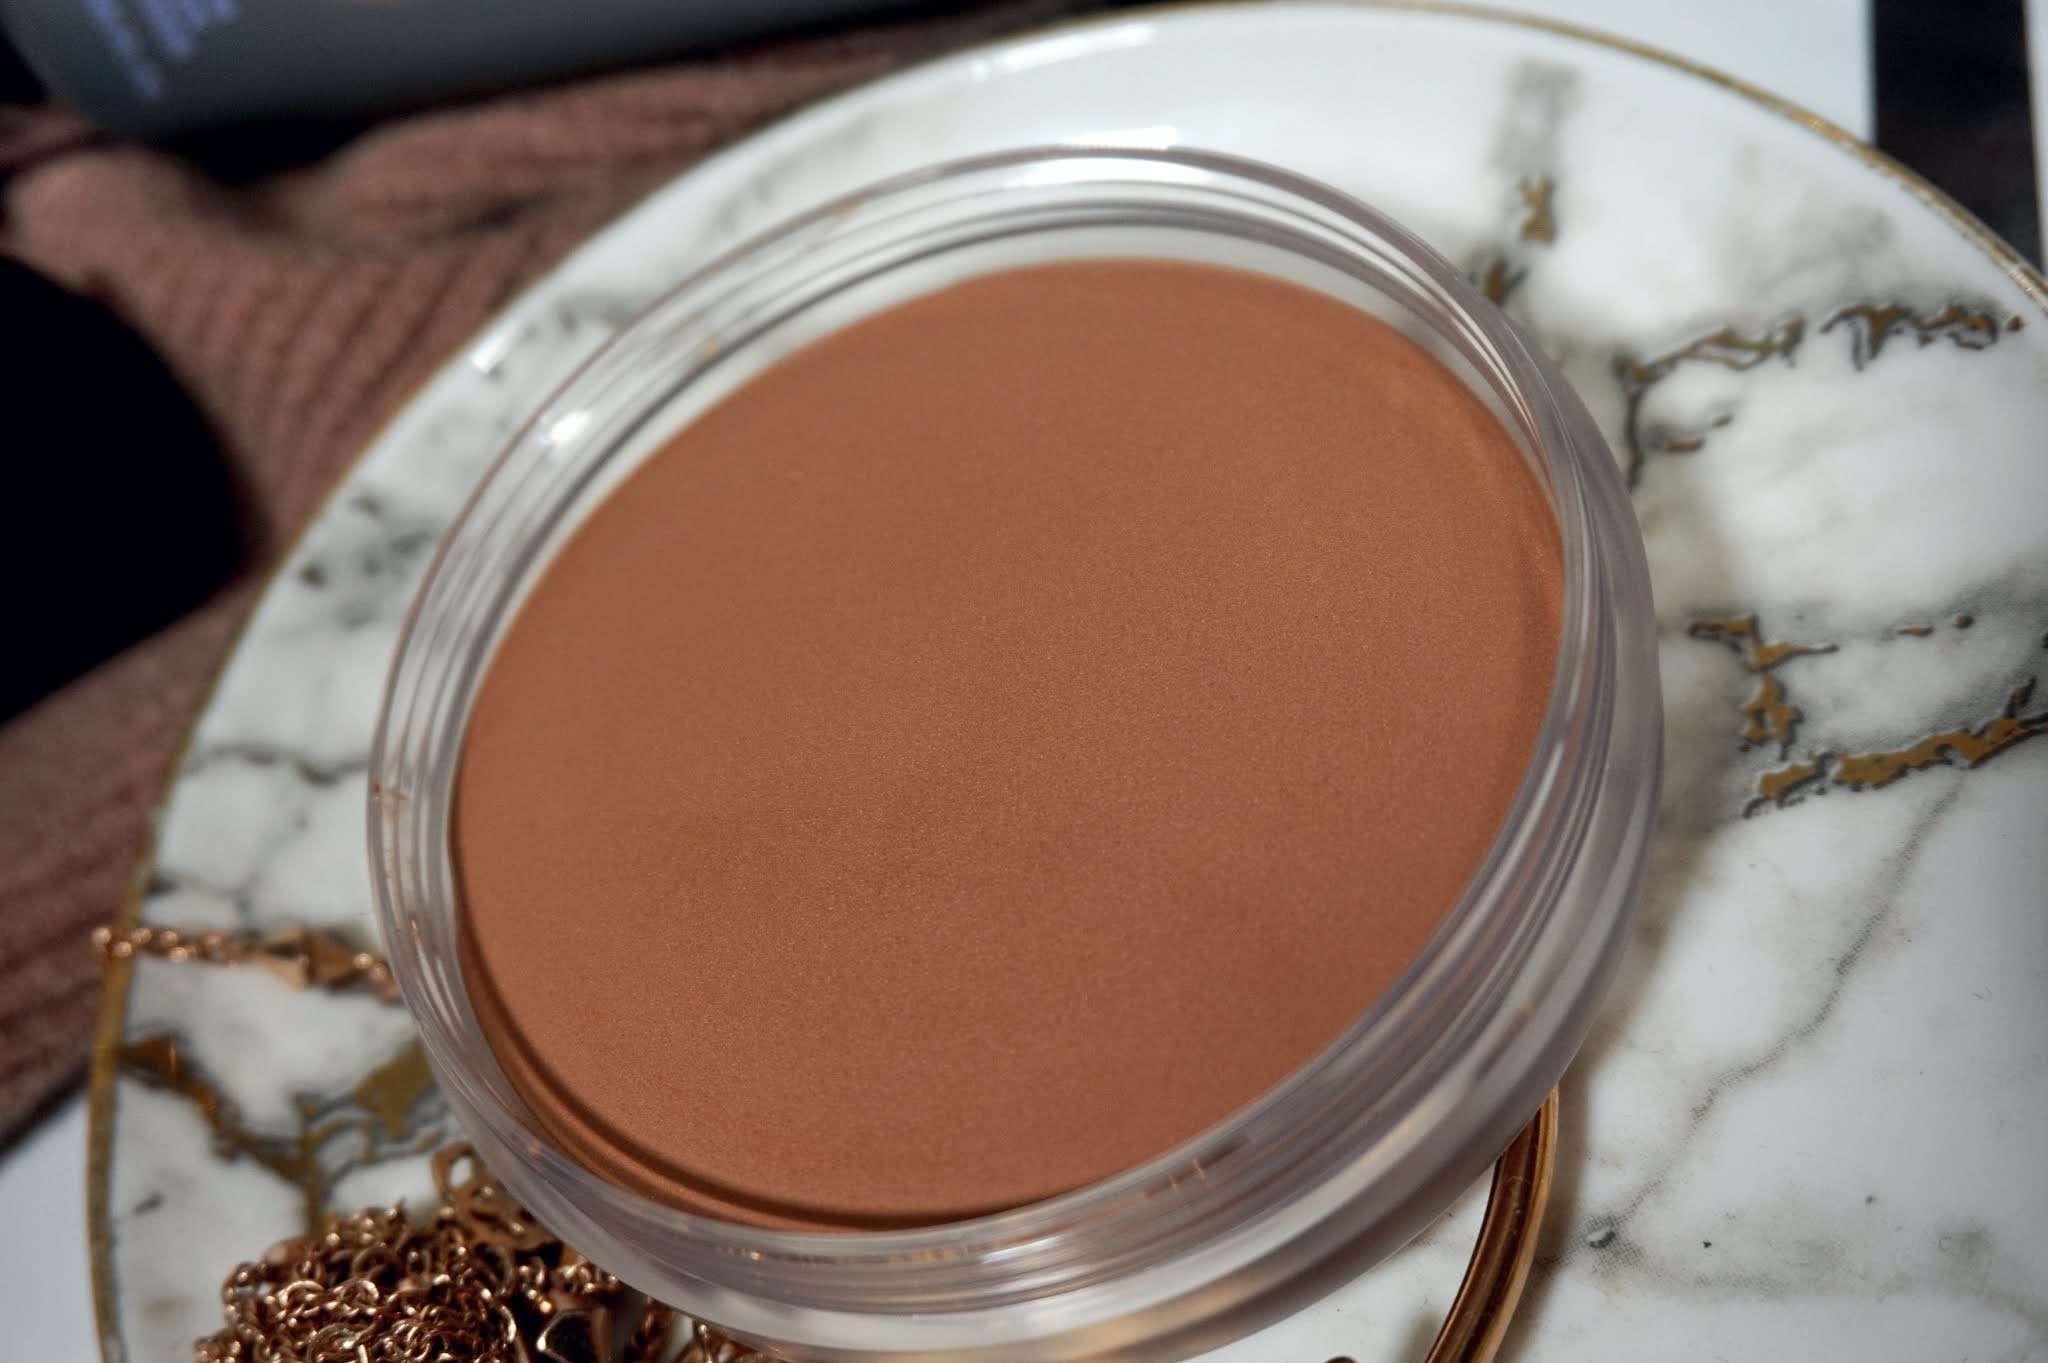 Saie Sun Melt Natural Cream Bronzer Review and Swatches